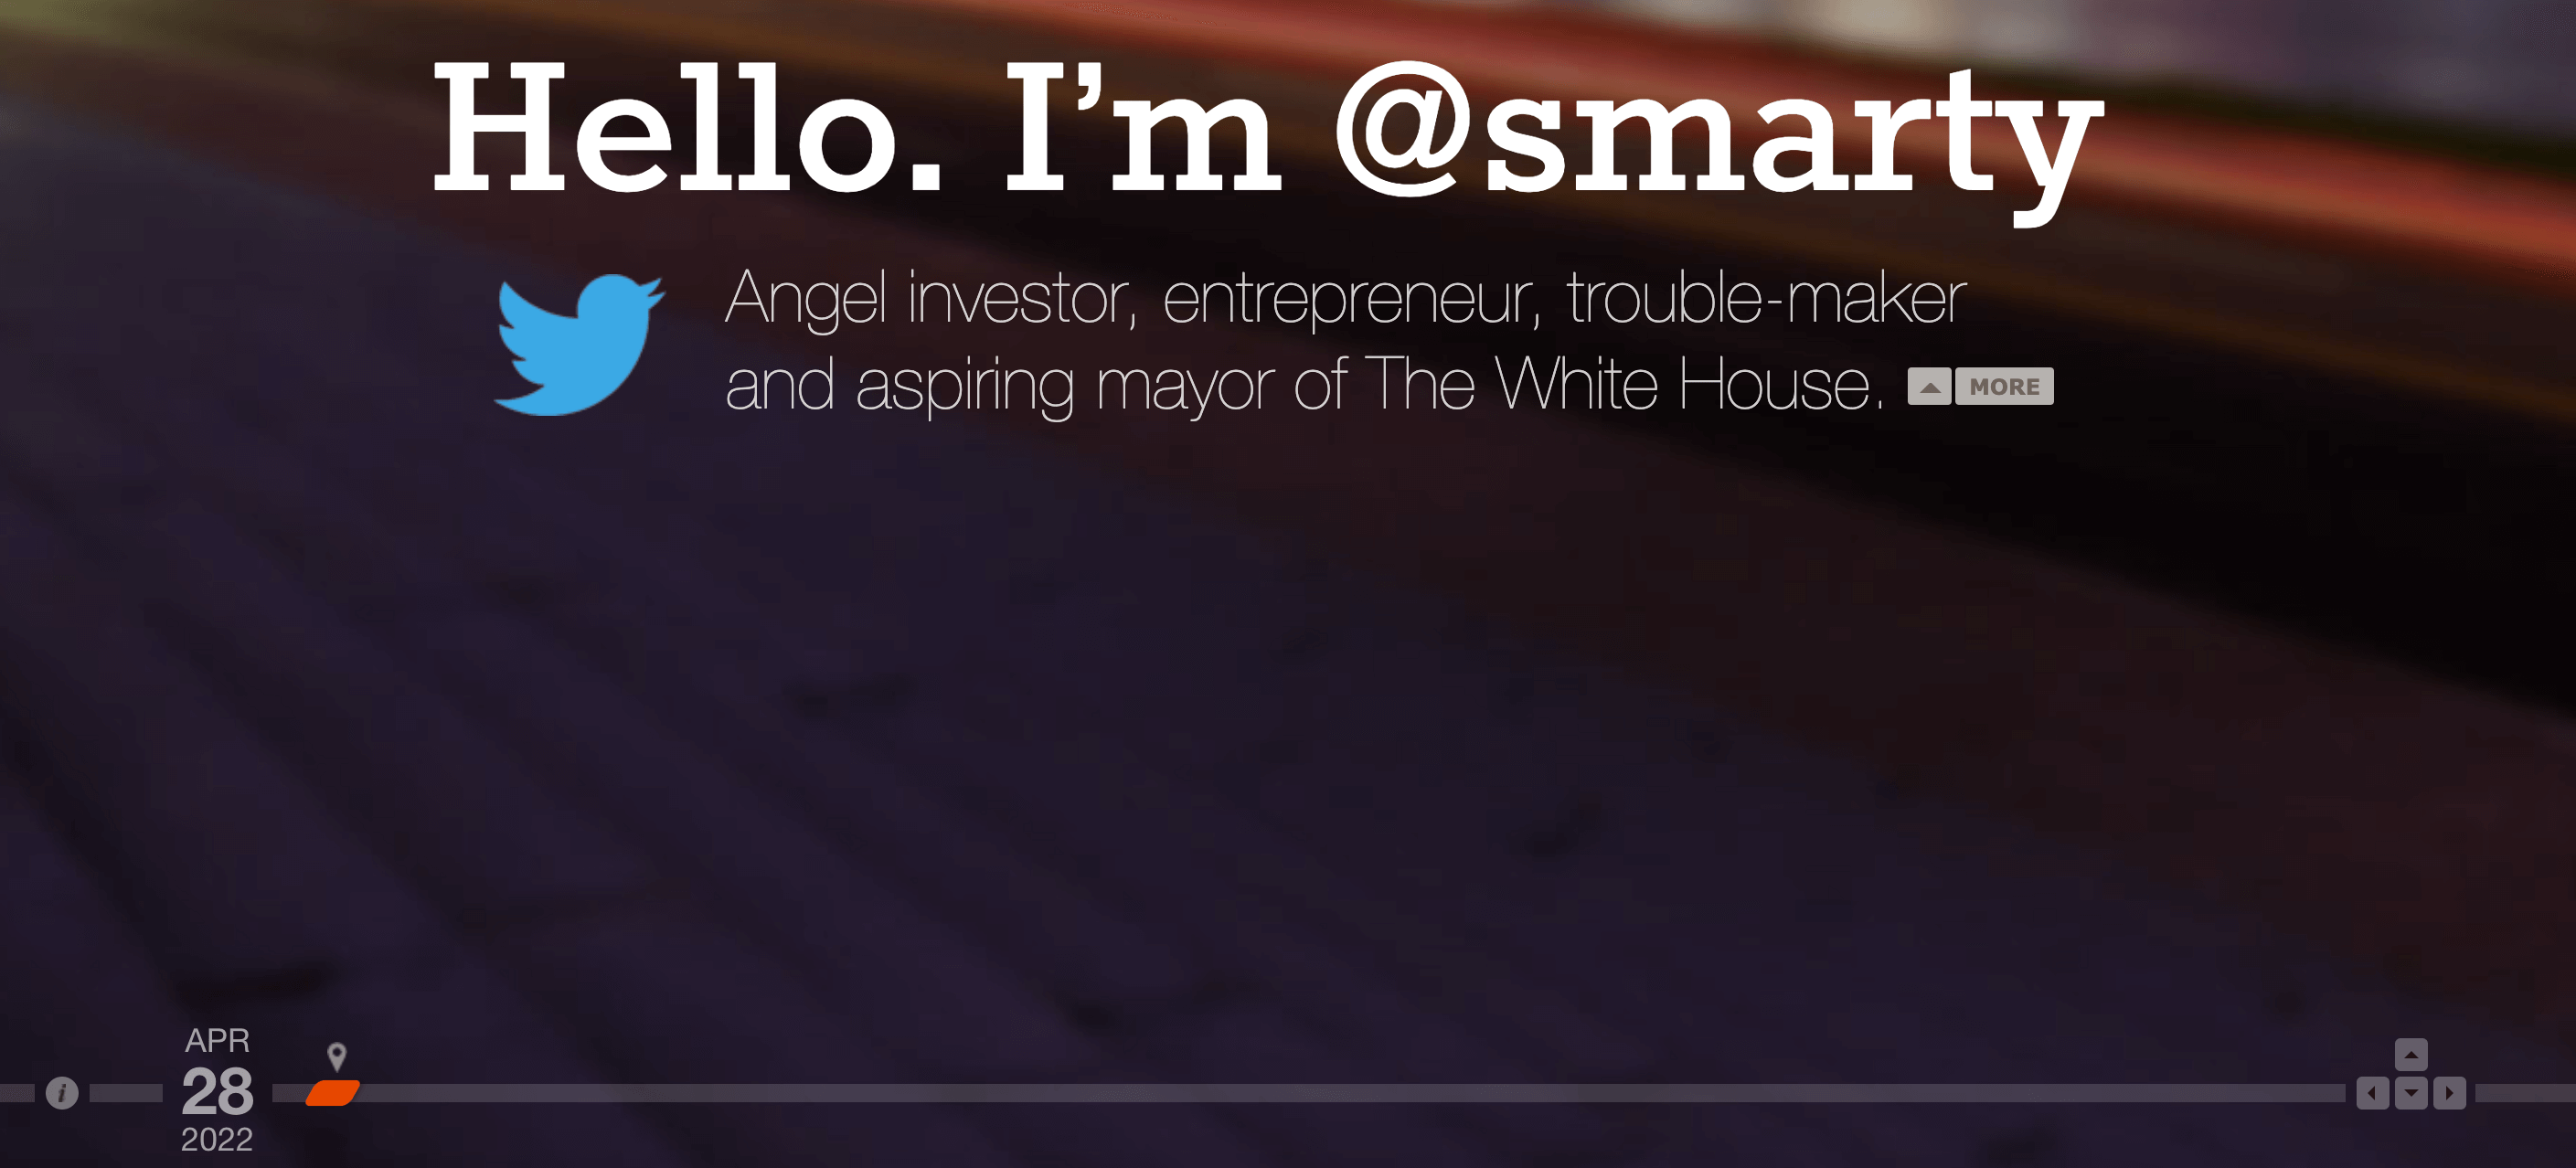 The slider at the beginning and the words "Hello. I'm @smarty. Angel investor, entrepreneur, trouble-maker, and aspiring mayor of the White House."